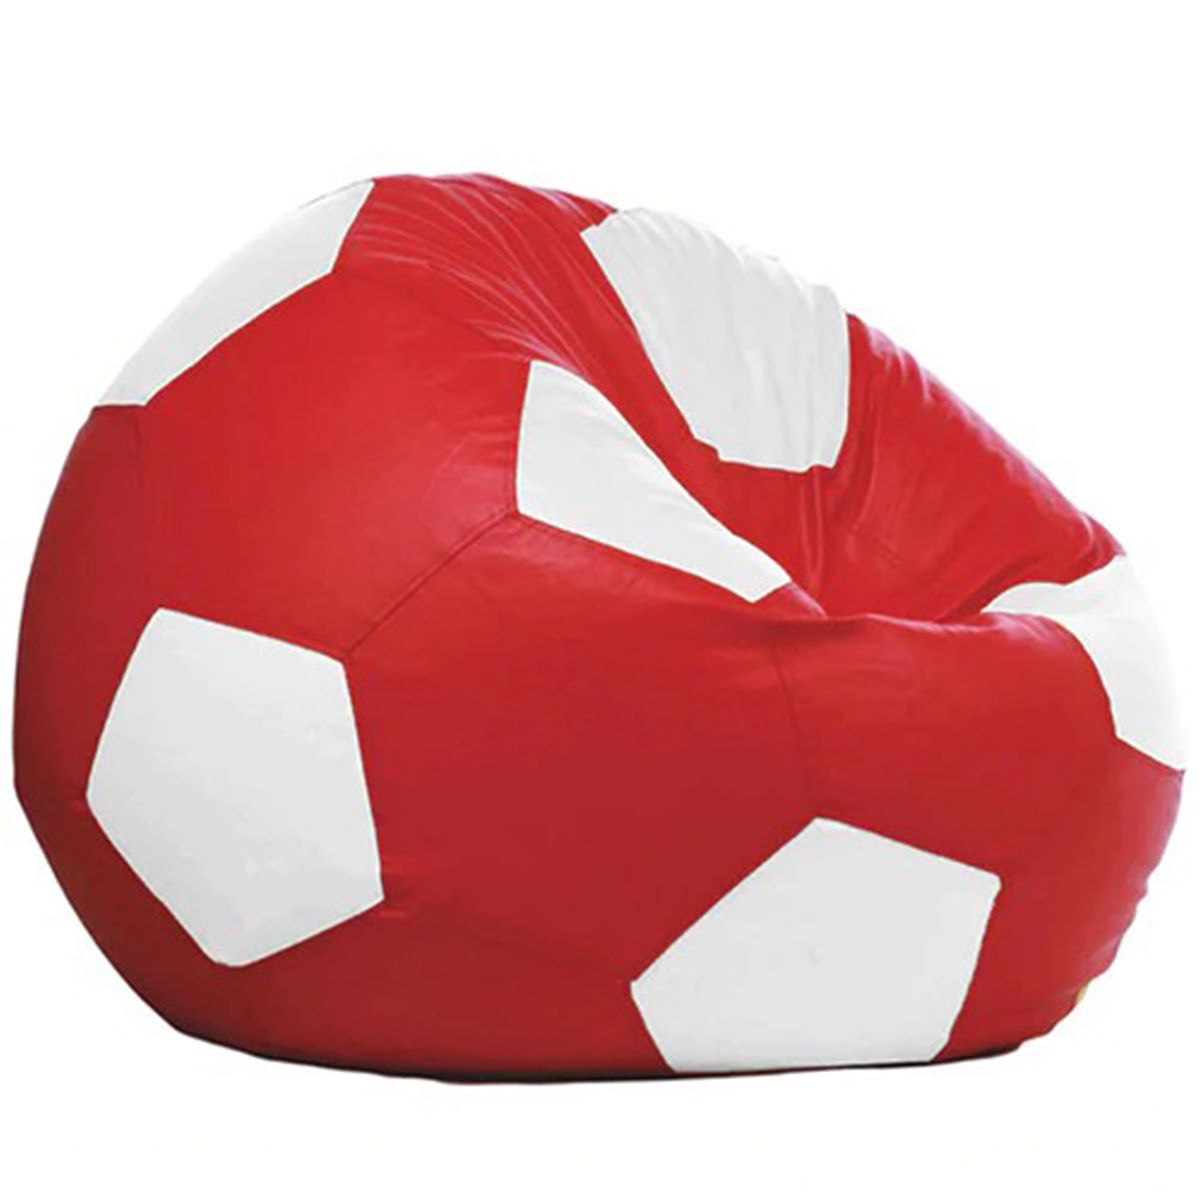 Leatherette Bean Bag Cover, Ideal for Children and Teenagers - Football